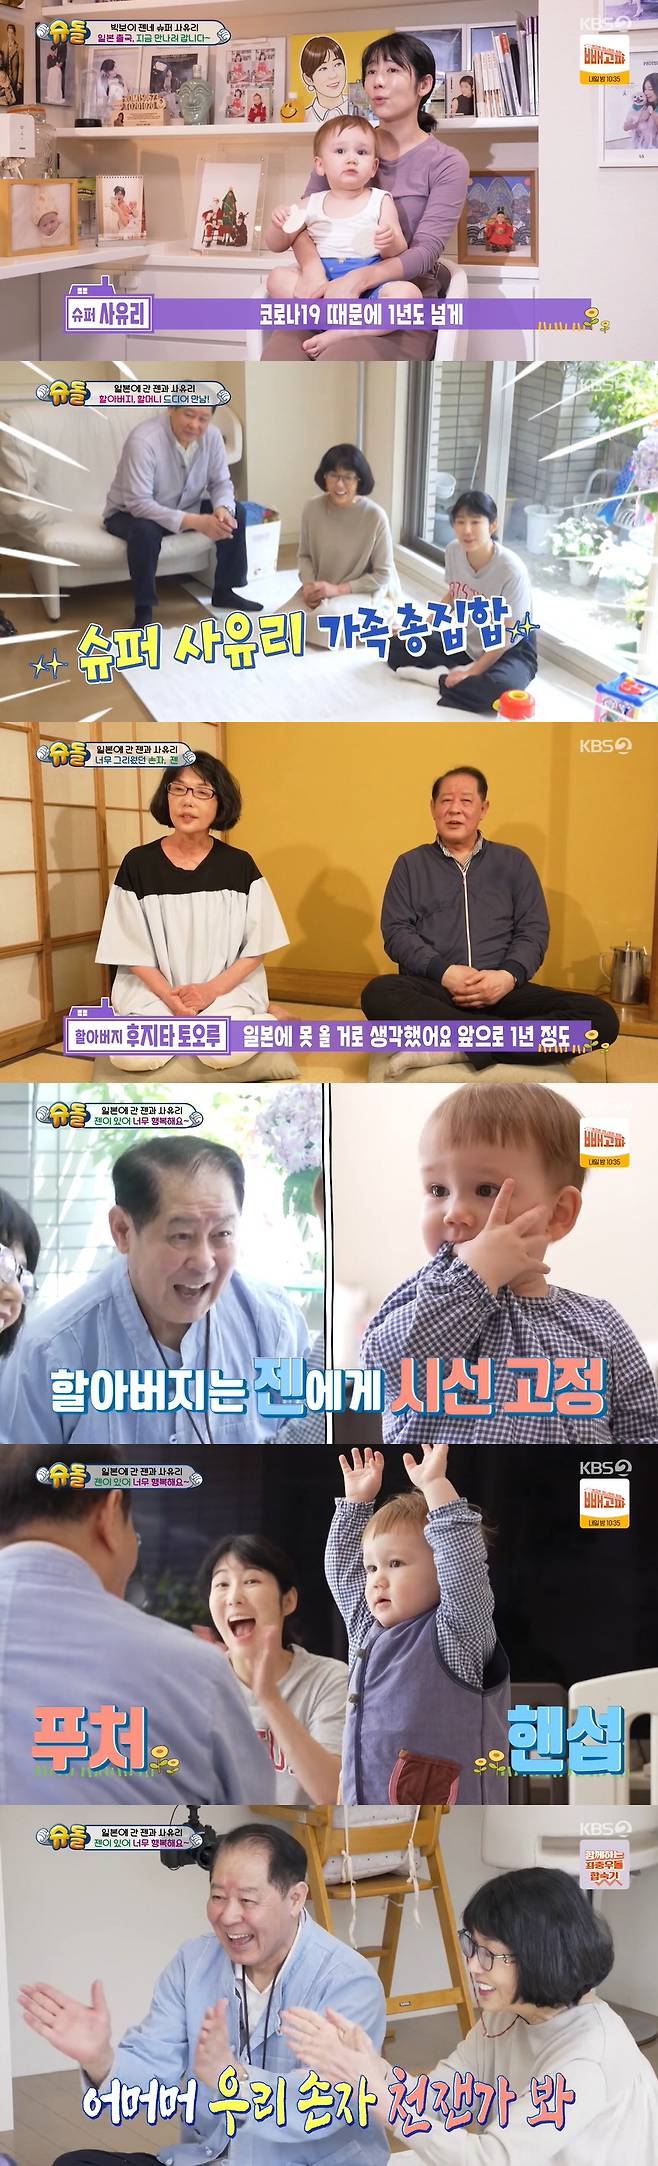 The Return of Superman Yon Hyon-min mentioned his marriage plan with GFriend Baek Jin-heeKBS 2TV Superman Returns broadcast on the 13th was decorated with We Love You Spring.Kim Tae-kyun said, I wanted to leave a pretty look when Harin was a baby, but I was sorry that I could not take a lot of pictures because of the hemangioma.So I am sorry for Harin, so I want to leave a record now, and I want to take a lot of pretty pictures. I planned a family portrait trip. Kim Tae-kyun invited actor Yoon Hyon-min as a photographer to film Family Portrait with Hyolyn, the Harin sisters.Yoon Hyon-min, who was a Nippon Professional Baseball player before his debut as an actor, showed off his affectionate aspect of bringing up camera equipment as well as sandwiches for Hyolyn and Harin sisters in the call of his senior Kim Tae-kyun.Hyolyn, the Harin sisters were shy and unfacing as the handsome The Uncle emerged.To get rid of the awkwardness with the kids, Yon Hyon-min told Hyolyn: Im a BTS fan too, you Jimins a fan.I am also a fan of Jimin, he said, leading to interest in the Ammy certification .Kim Tae-kyun was jealous, saying, The Uncle GFriend is there, breaking the dream, when the two daughters showed a 180-degree difference from what they did to him.Do children like it? he asked Baek Jin-hee and Yoon Hyon-min, who have been in love for six years.I am a three-brother, my nephew is a man, said Yoon Hyon-min. I will have a must daughter. I imagine I would like to have two daughters.But GFriend is three sisters, he replied.Kim Tae-kyun asked, Do you have all the plans with GFriend? And Yoon Hyon-min carefully mentioned marriage and child plan, saying, Its been a long time since I have loved it.On the other hand, Yoon Hyon-min prepared Nippon Professional Baseball, soldiers, and princess concept for Kim Tae-kyuns Family Portrait.Especially, when I saw the Kim Tae-yun family wearing uniforms, I could not hide my envy, saying, It is my romance, I would like to wear the uniform I wore when I was a player with my children.Yonghee, Seohyun, and Seeun Back Brother and Sister went on a walk in the neighborhood on the last day of a one-night, two-day trip without Father.Back and Sister, who had been led into a strange house by the sound of dog barking during the walk, found a group of chicks in the corner.In the desire to raise a chick, Yonghee asked, Can not you give me a chick Phoenix Marie? And Grandmas Boy presented a chick.So, Seohyun said, I will return it when I become a chicken.Seeun, who wanted his own chick, said, I want to raise it too, and Yonghee warned, One Phoenix Marie can eat with chicken (?).However, Se-eun, who could not give up the chicks even after his brothers warning, eventually got his own chicks separately.So Yo-jin, who saw the chicks that Back Brother and Sister got, fell into a menbung, but calmly persuaded the children.So BackBrowther and Sister decided to build a chick house and return it to Grandmas Boy.It was a short time, but the back and Sister gave the chick an apple and a pongpong name and gave affection to the chick.Sayuri and Jen headed to Japan to meet Grandmas Boy, grandfatherGrandmas Boy, who met her daughter and grandchild in about 406 days, did not leave a smile on her grandfathers mouth.Grandmas Boy said, I was a little scared because I was not familiar because I did not meet my daughter and grandchildren for a long time. However, I was more relieved that Jen was a healthy child because she was much bigger and stronger than I watched on TV. I thought I wouldnt be able to come to Japan for about a year, but I was so surprised to come suddenly, and I was surprised that (Zen) was very healthy and changed so much.I thought I should try and live healthy. On this day, Jen had a joke in front of Grandmas Boy, Grandpa, who had met for a long time.Sayuri said, Pretty, and he quickly understood the words, stabbed the ball with his fingers, and when he called his name, he raised his hand as if to answer, and surprised Grandmas Boy, Grandpa.In particular, Grandmas Boy and Grandpa showed off the aspect of grandchild fool by shouting genius genius with explosive reaction in the appearance of Jen who understands not only Korean but also Japanese.